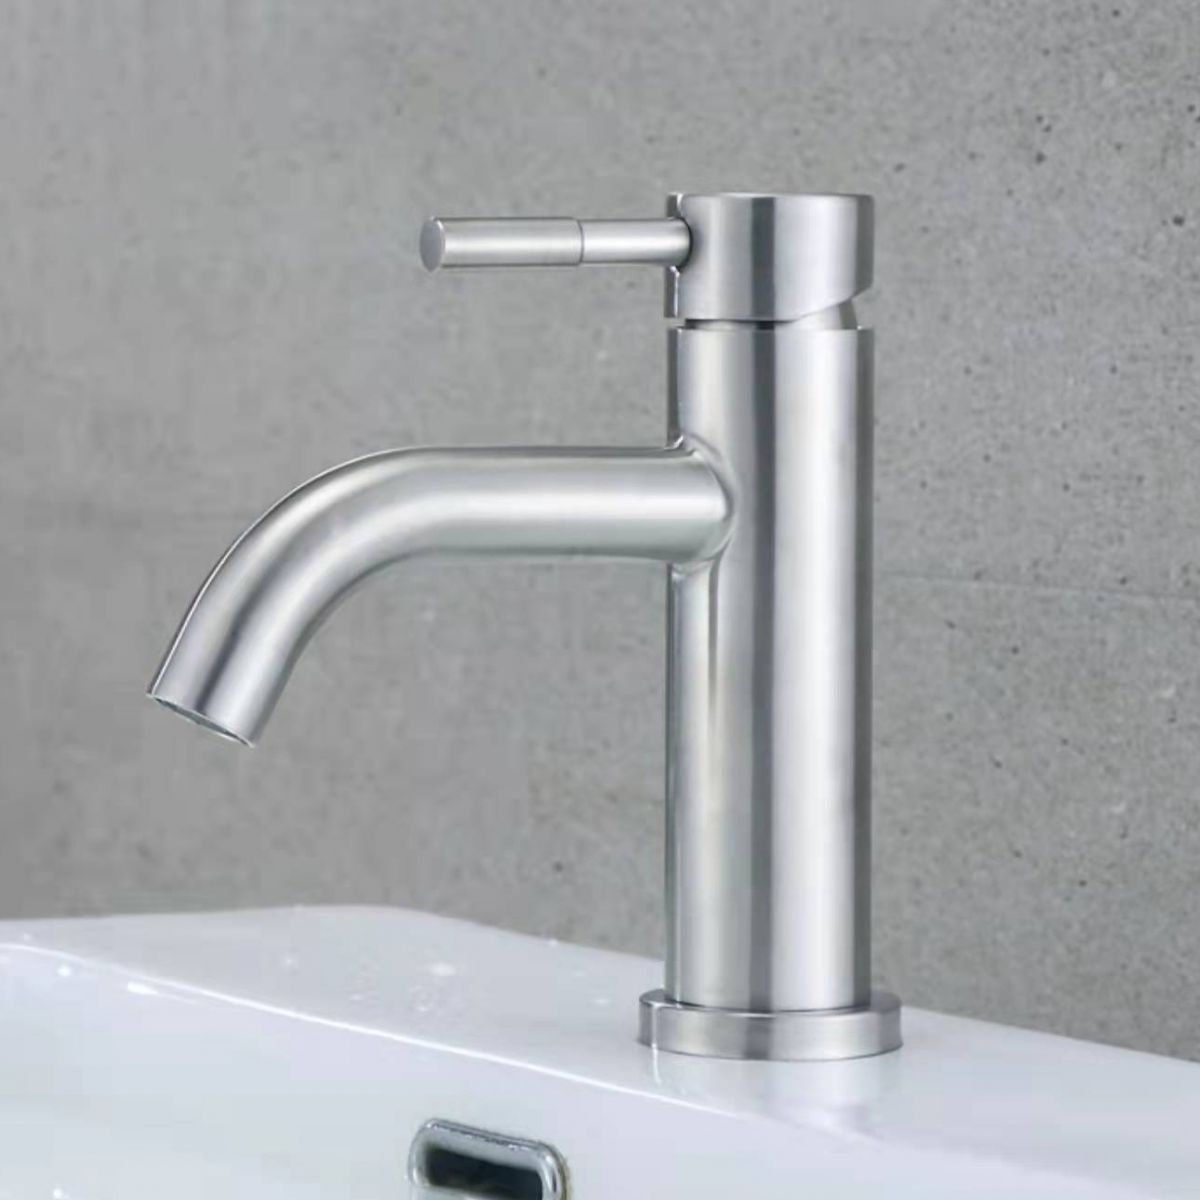 Stainless Steel Bathroom Faucet Chrome Lever Handle Sink Faucet with 1 Hole